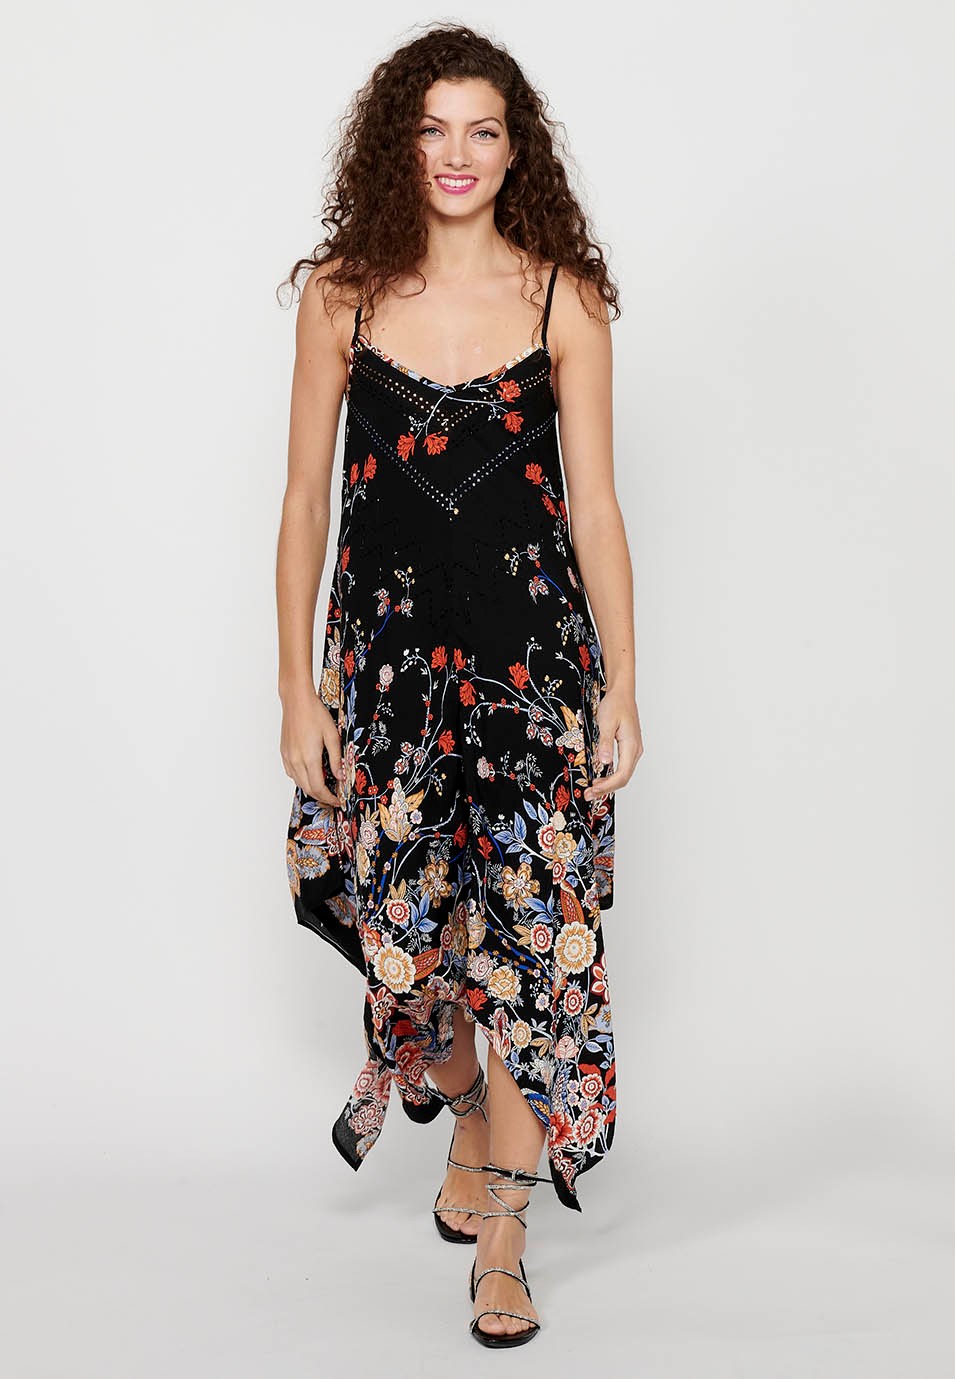 Strap Dress with V-neck and Black Floral Print for Women